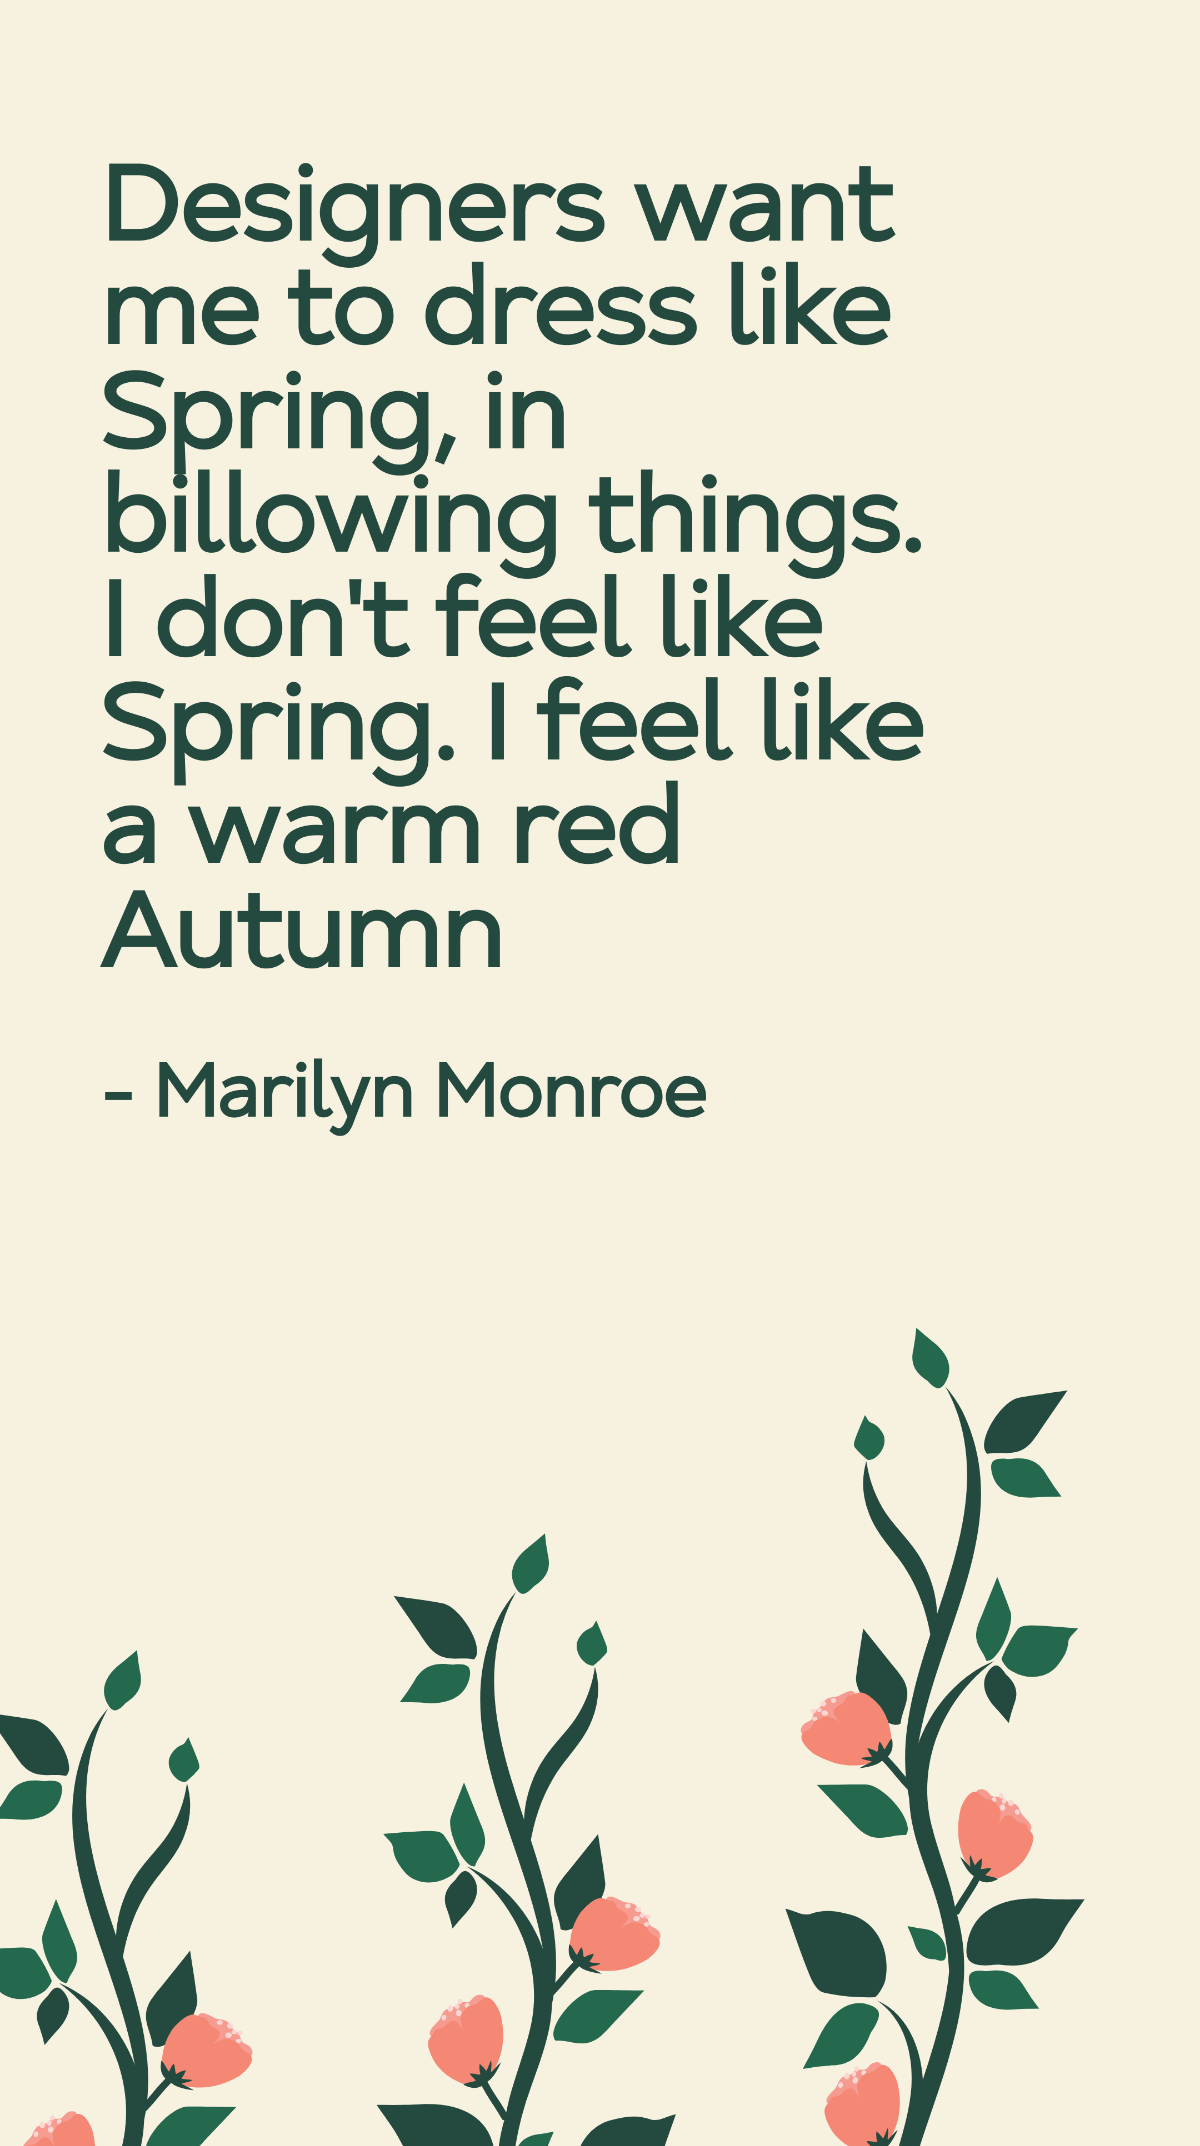 Marilyn Monroe - Designers want me to dress like Spring, in billowing things. I don't feel like Spring. I feel like a warm red Autumn